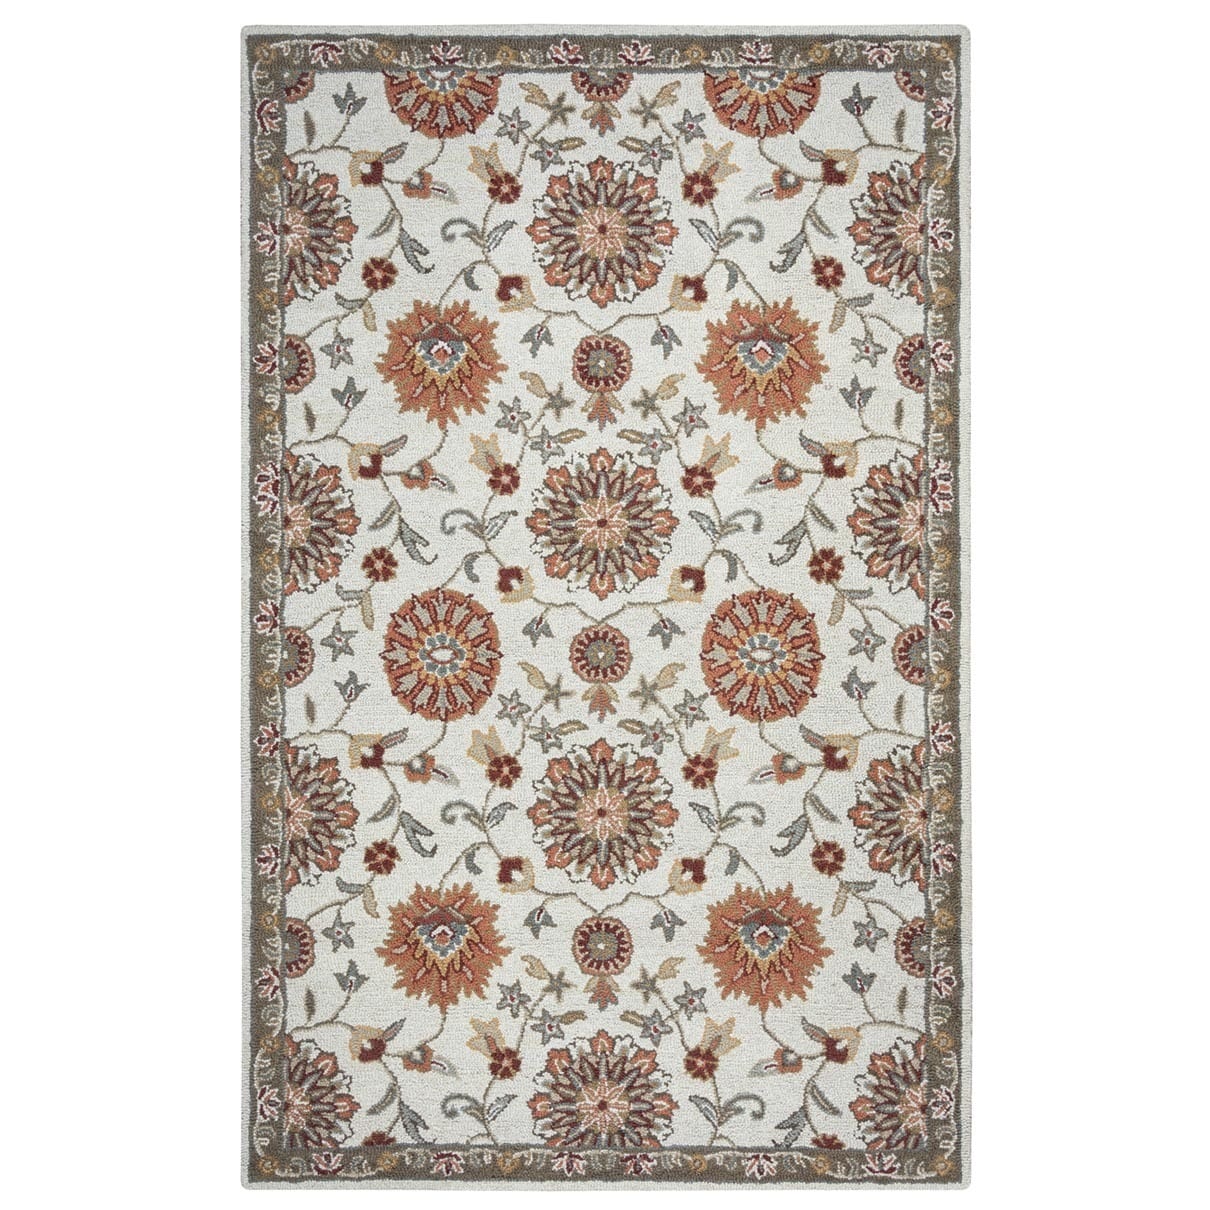 Hand tufted Handicraft Imports Aisling Beige Oriental style Wool blend Area Rug (5 X 8)